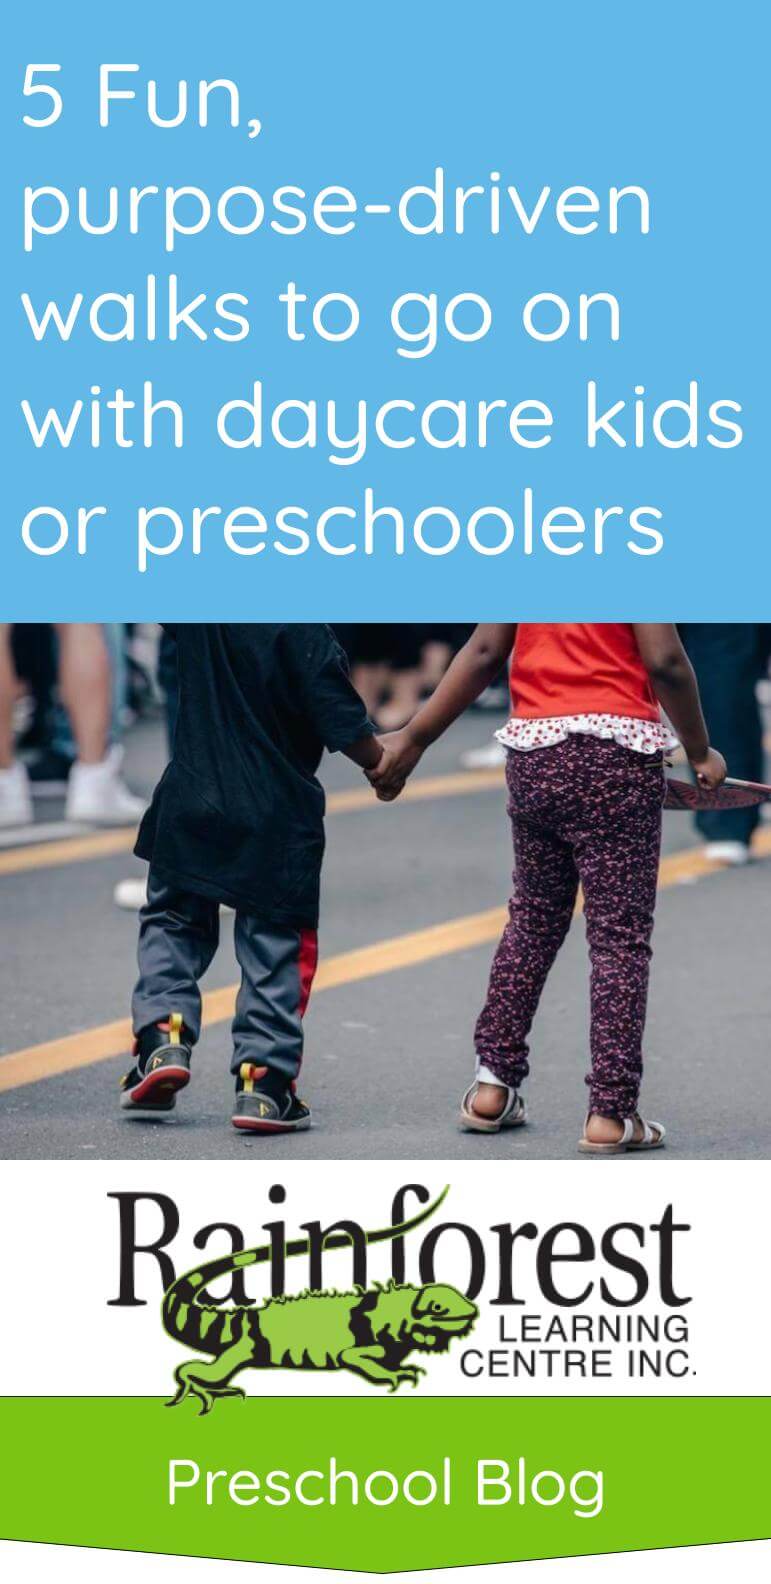 Purpose driven walks to go on with daycare or preschool kids - article Pinterest image